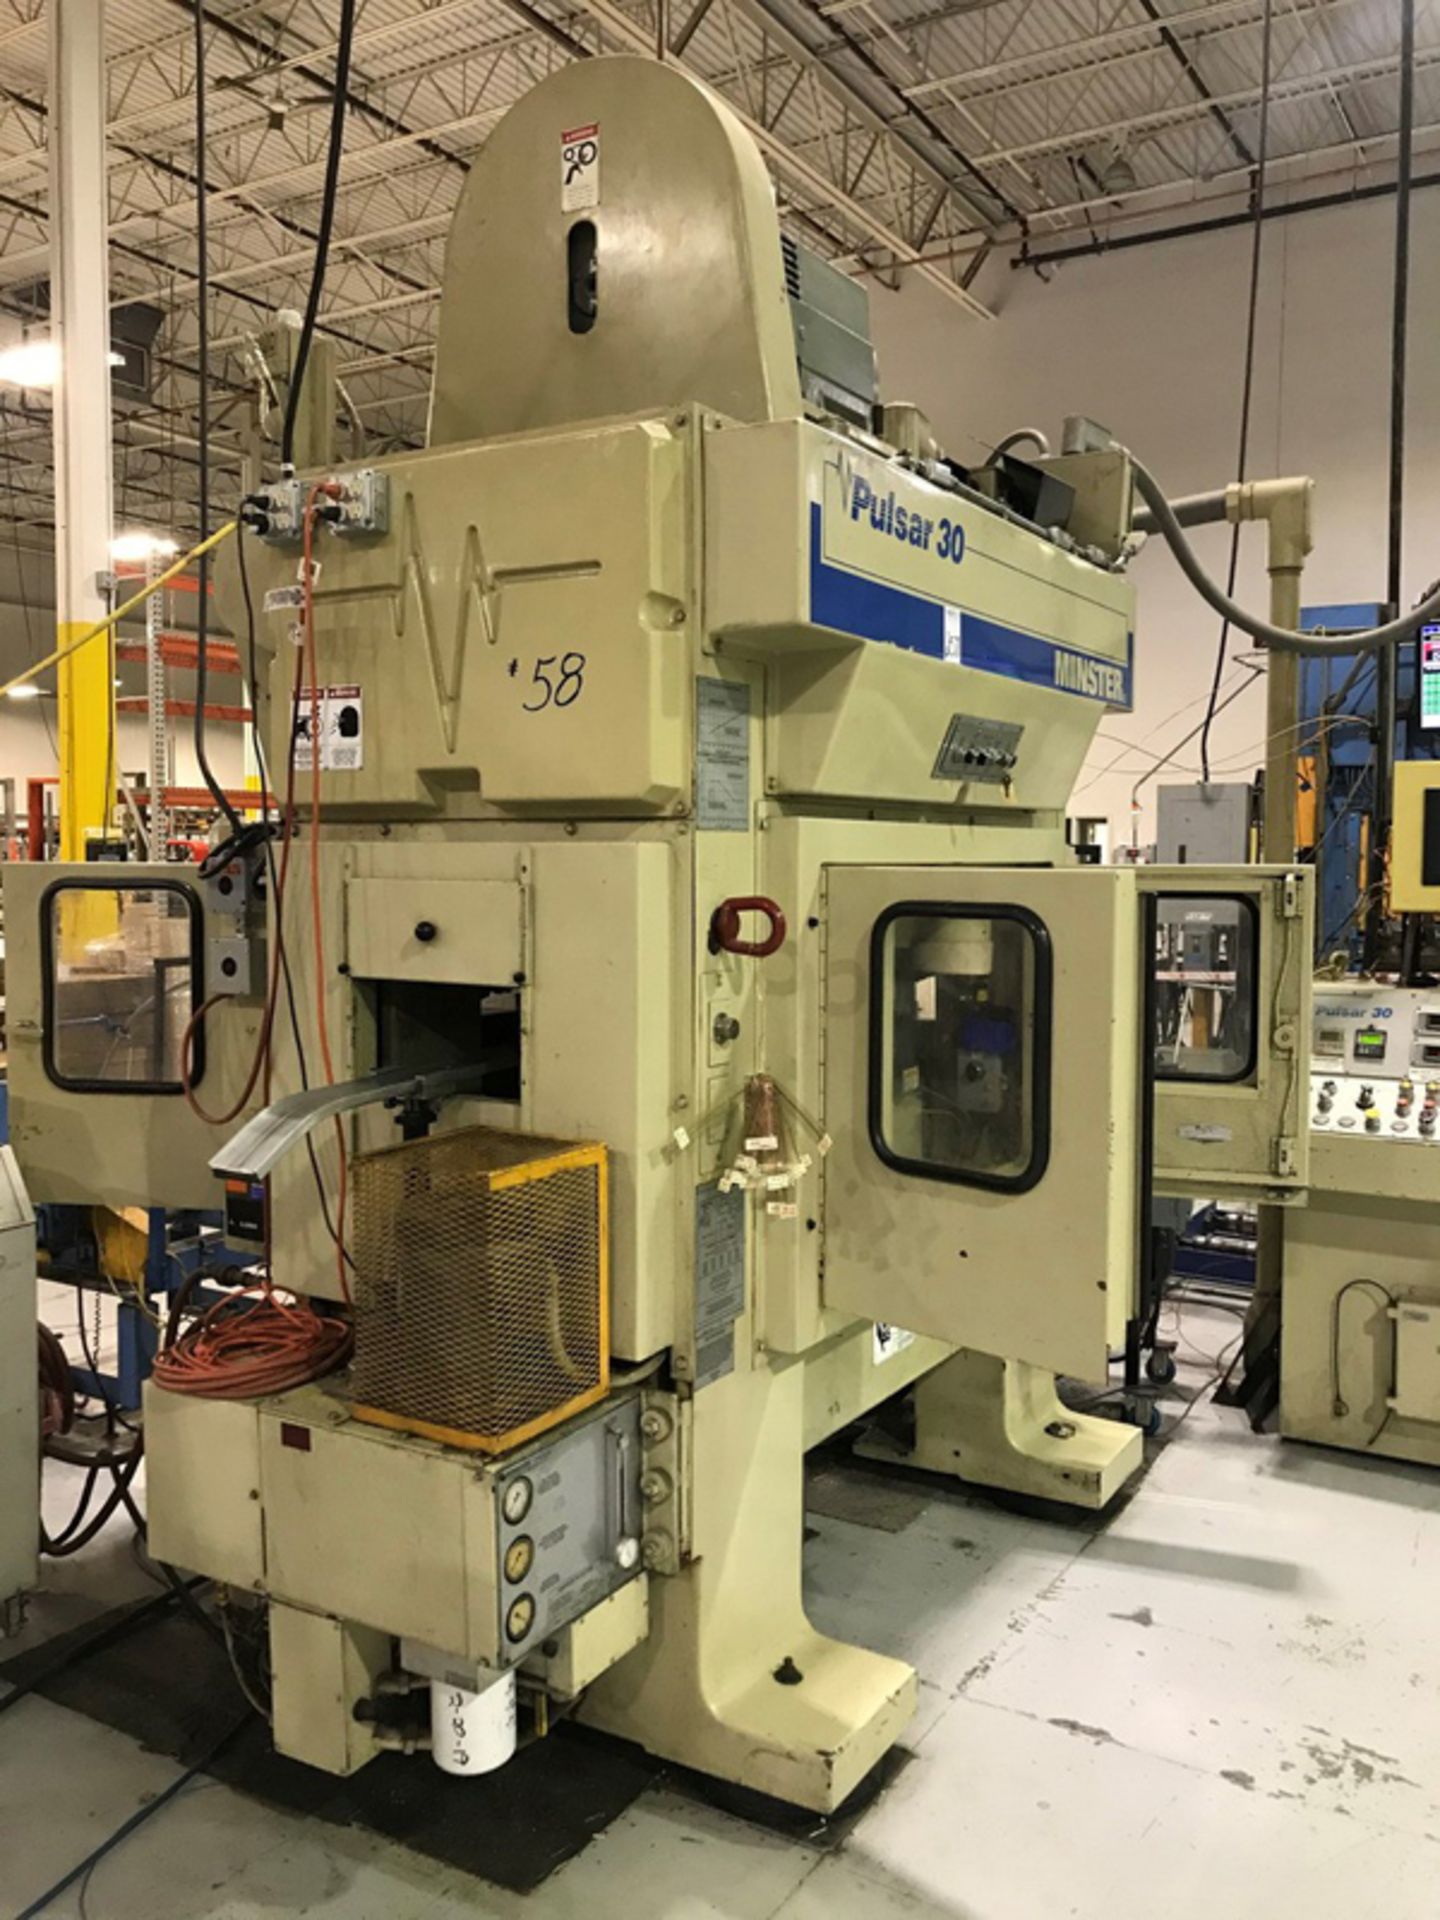 Minster Pulsar 30 High Speed Double Crank Press 30 Ton x 30'' x 21'' (Located in Painesville, OH) - Image 2 of 7